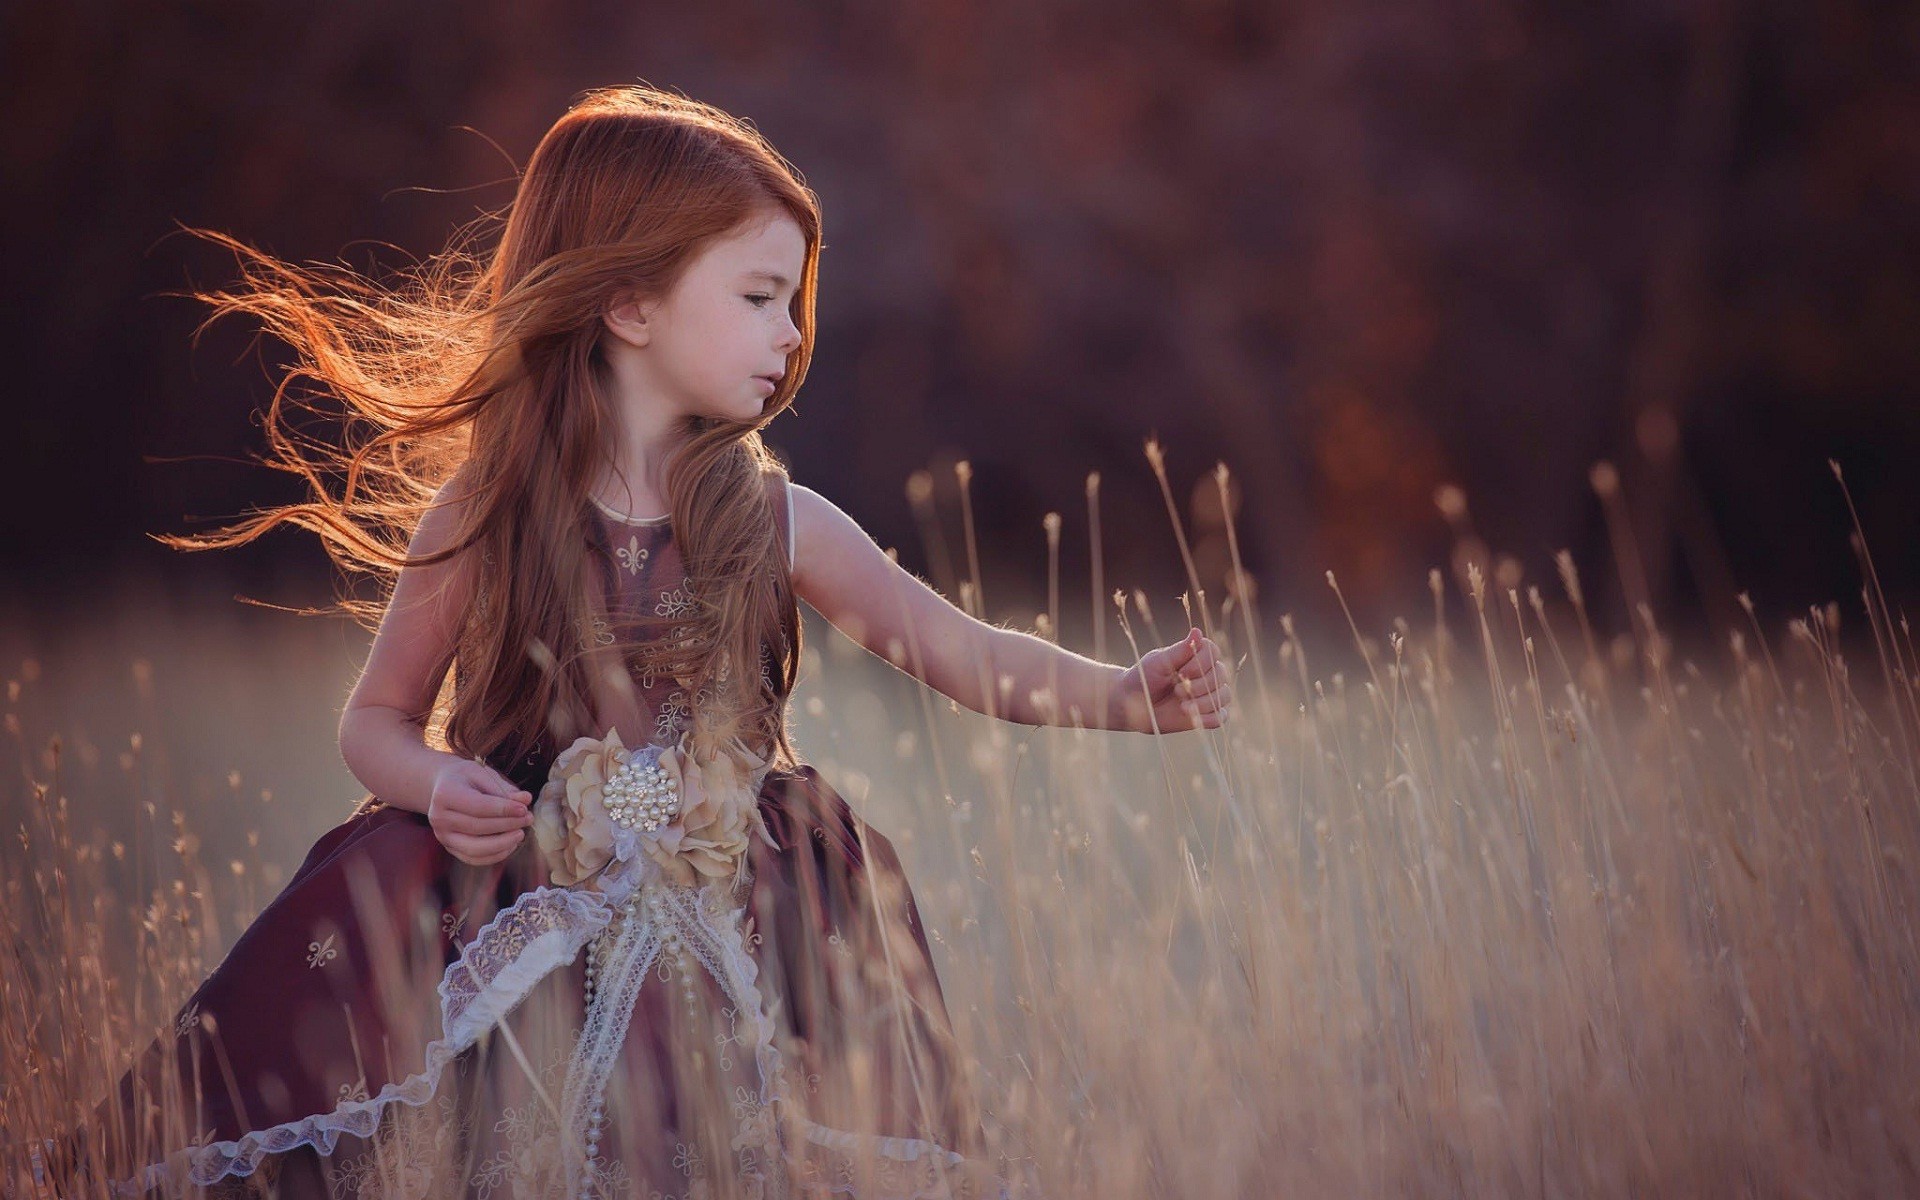 facebook wallpaper for profile,people in nature,beauty,child,photography,dress